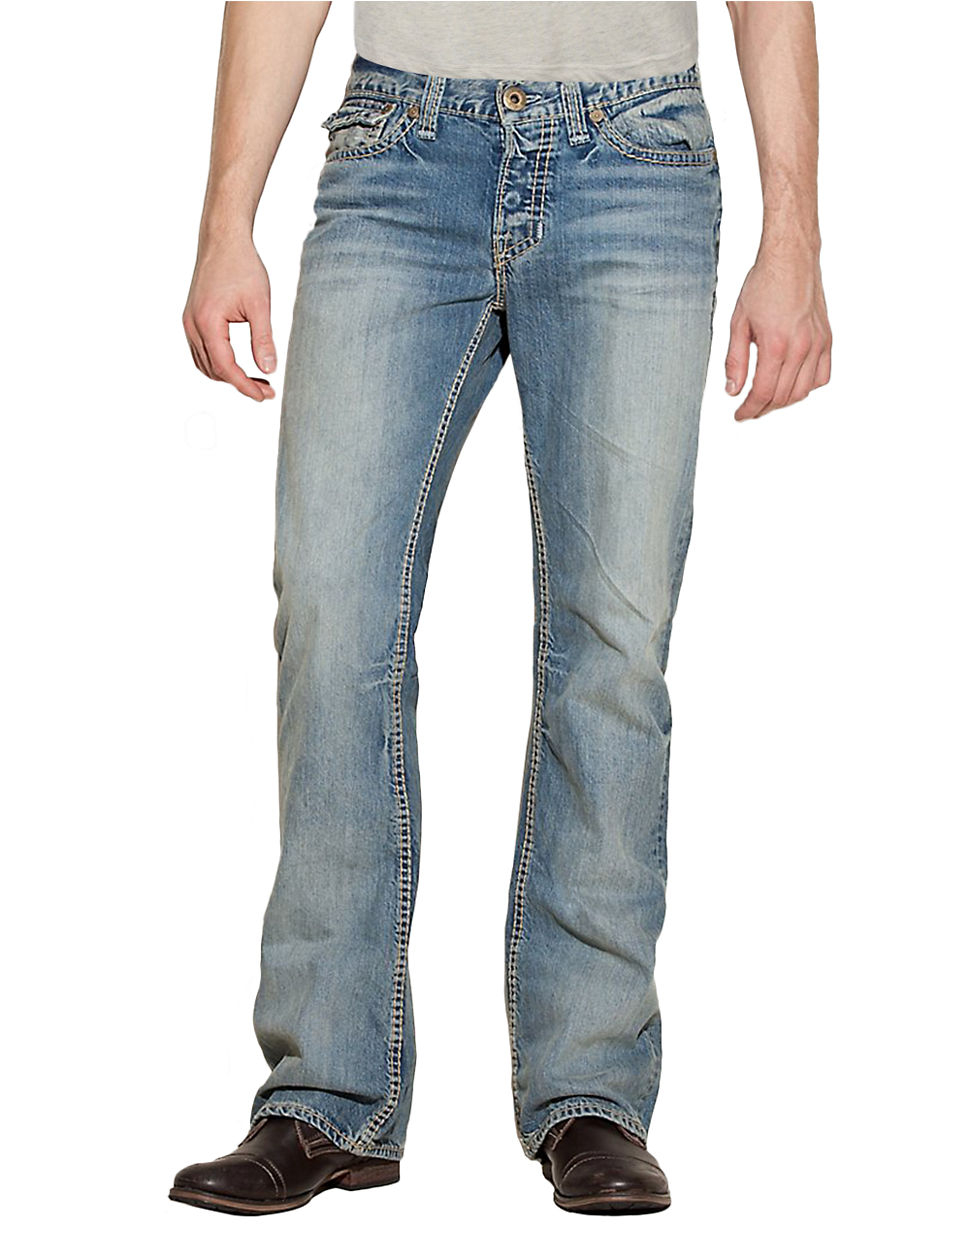 Lyst - Guess Falcon Classic Bootcut Jeans in Blue for Men